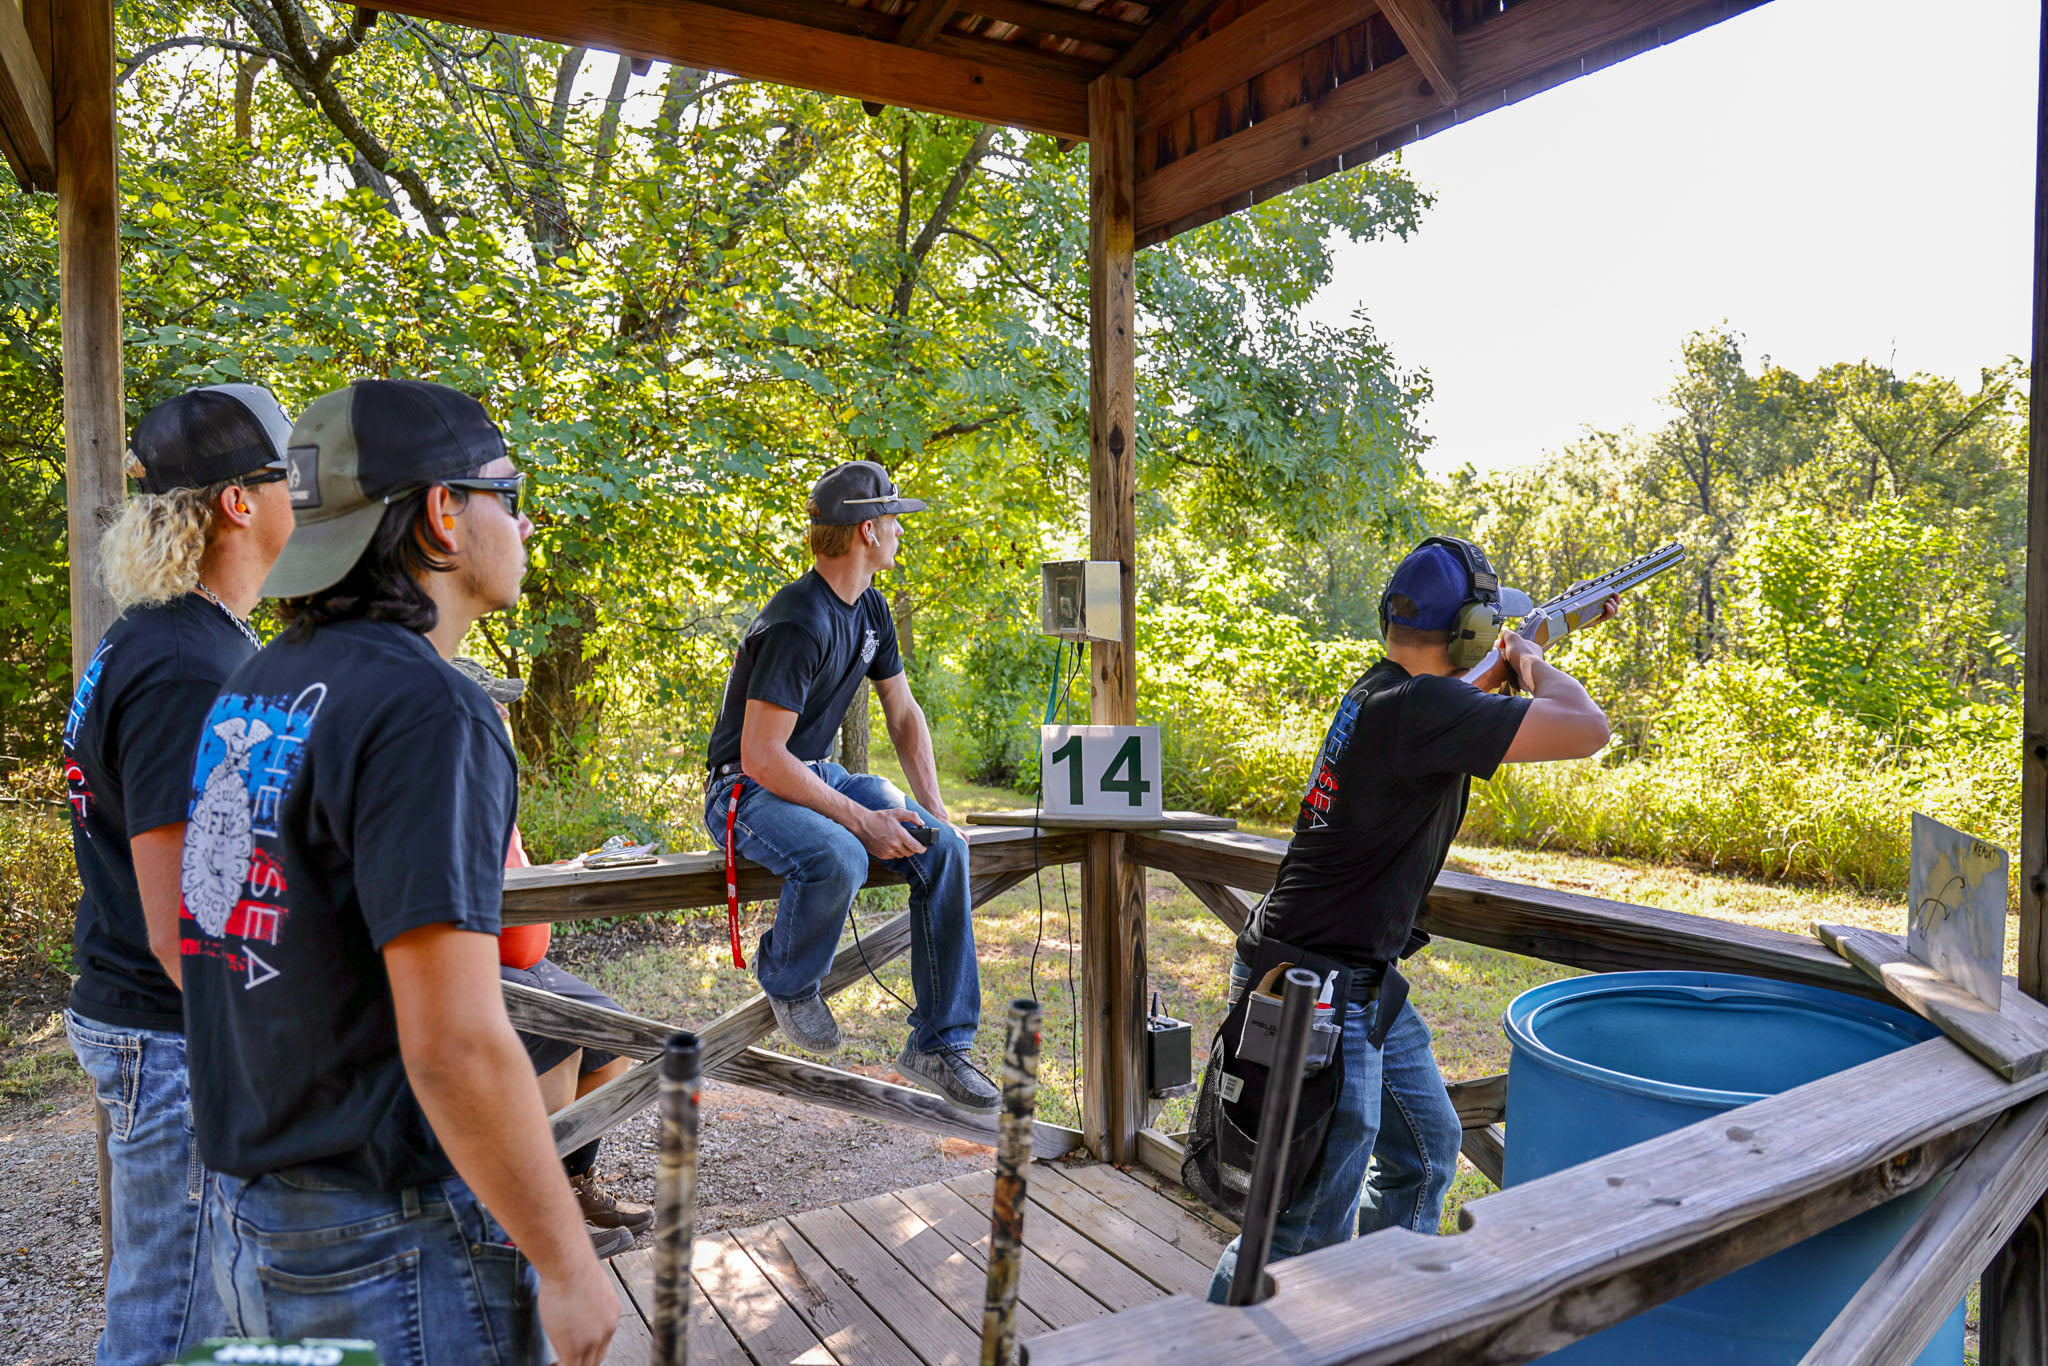 OKFB Shotgun Shoot Hosted by Young Farmers and Ranchers Raises Funds for Foundation